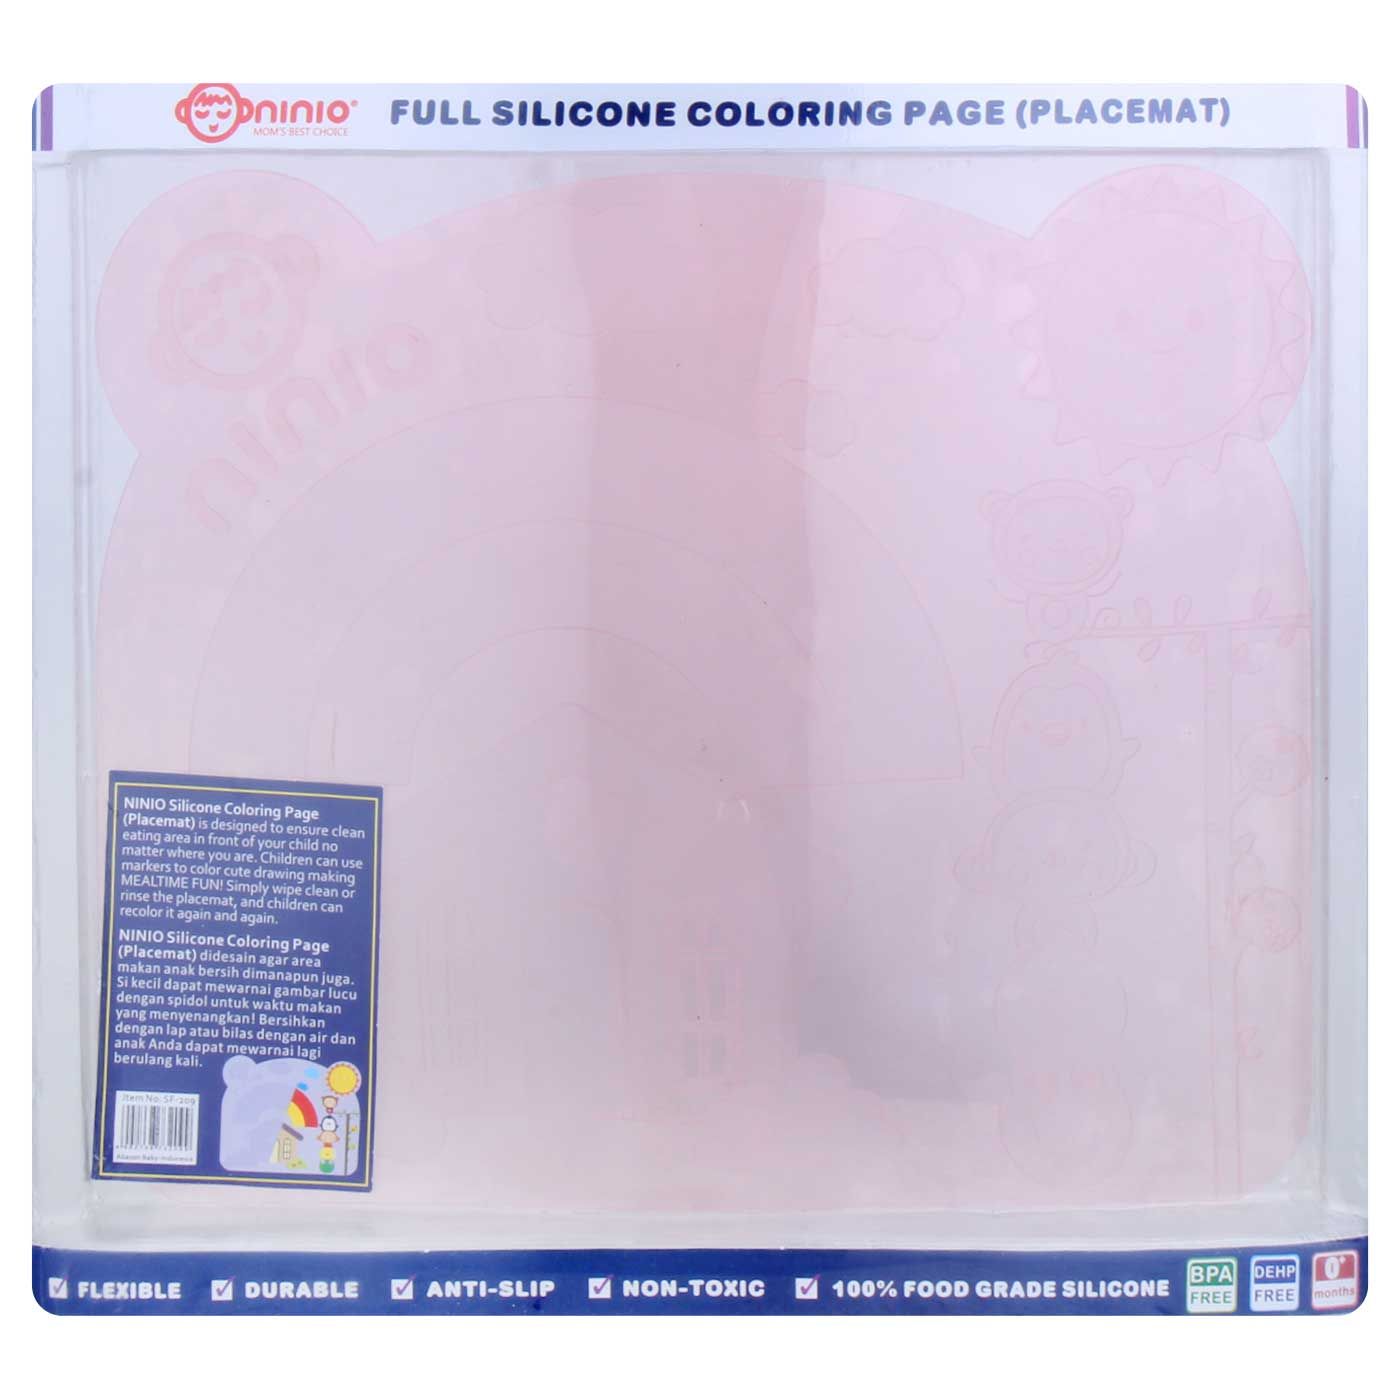 Ninio Full Silicone Coloring Page Placemat Pink - 1